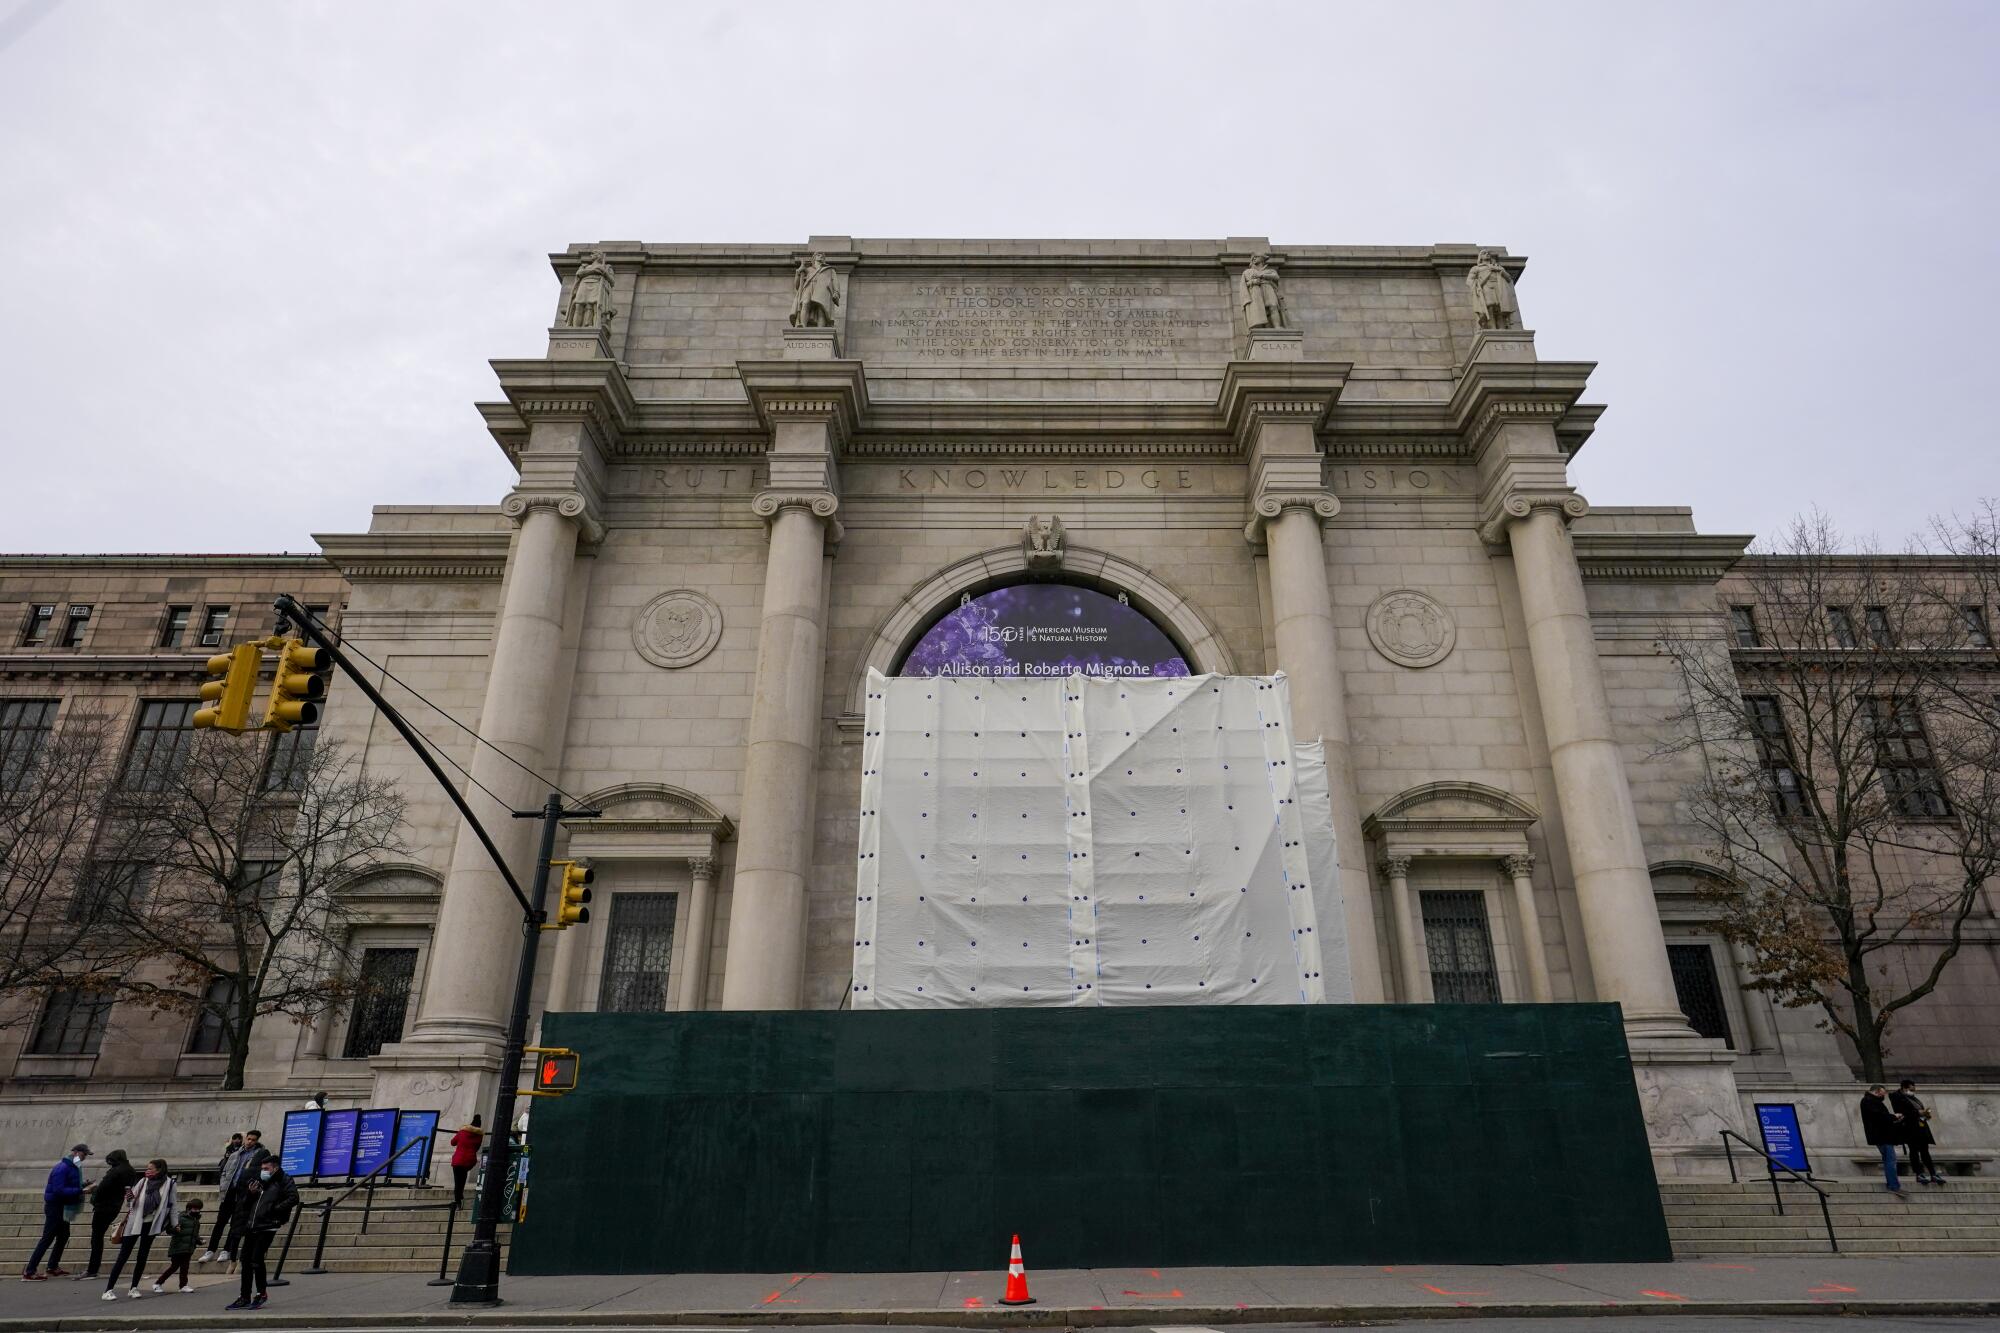 A scaffolding and tarp block views of a monument to Theodore Roosevelt before a Neoclassical building facade